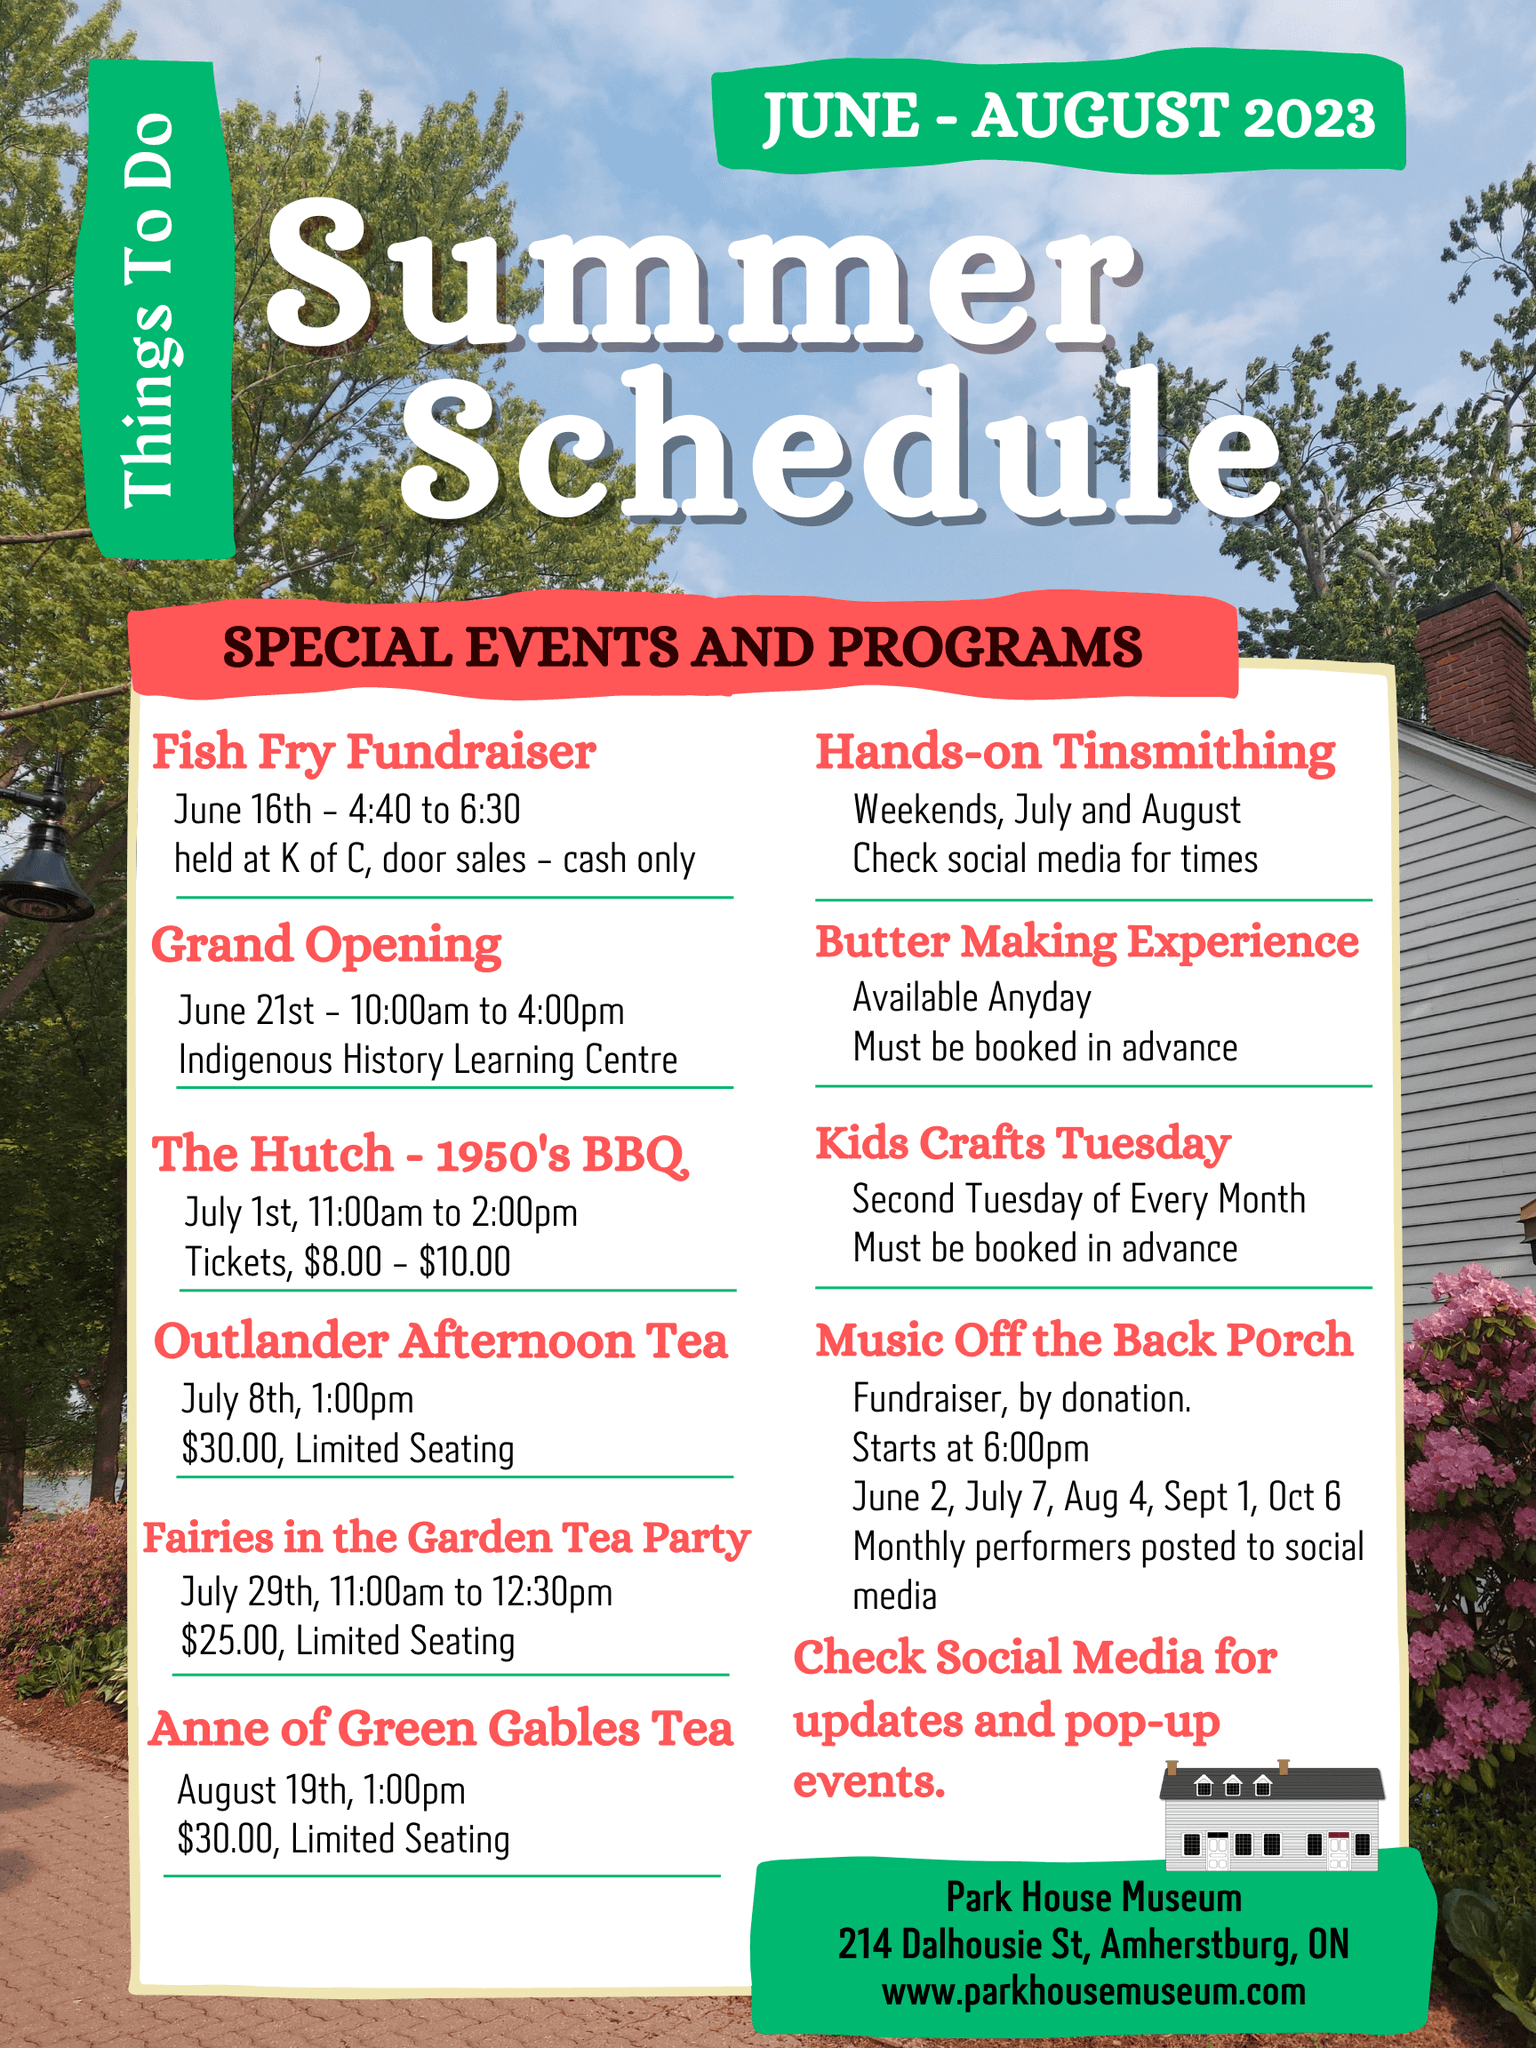 The Park House Museum 2023 Summer Schedule of special events and programs.